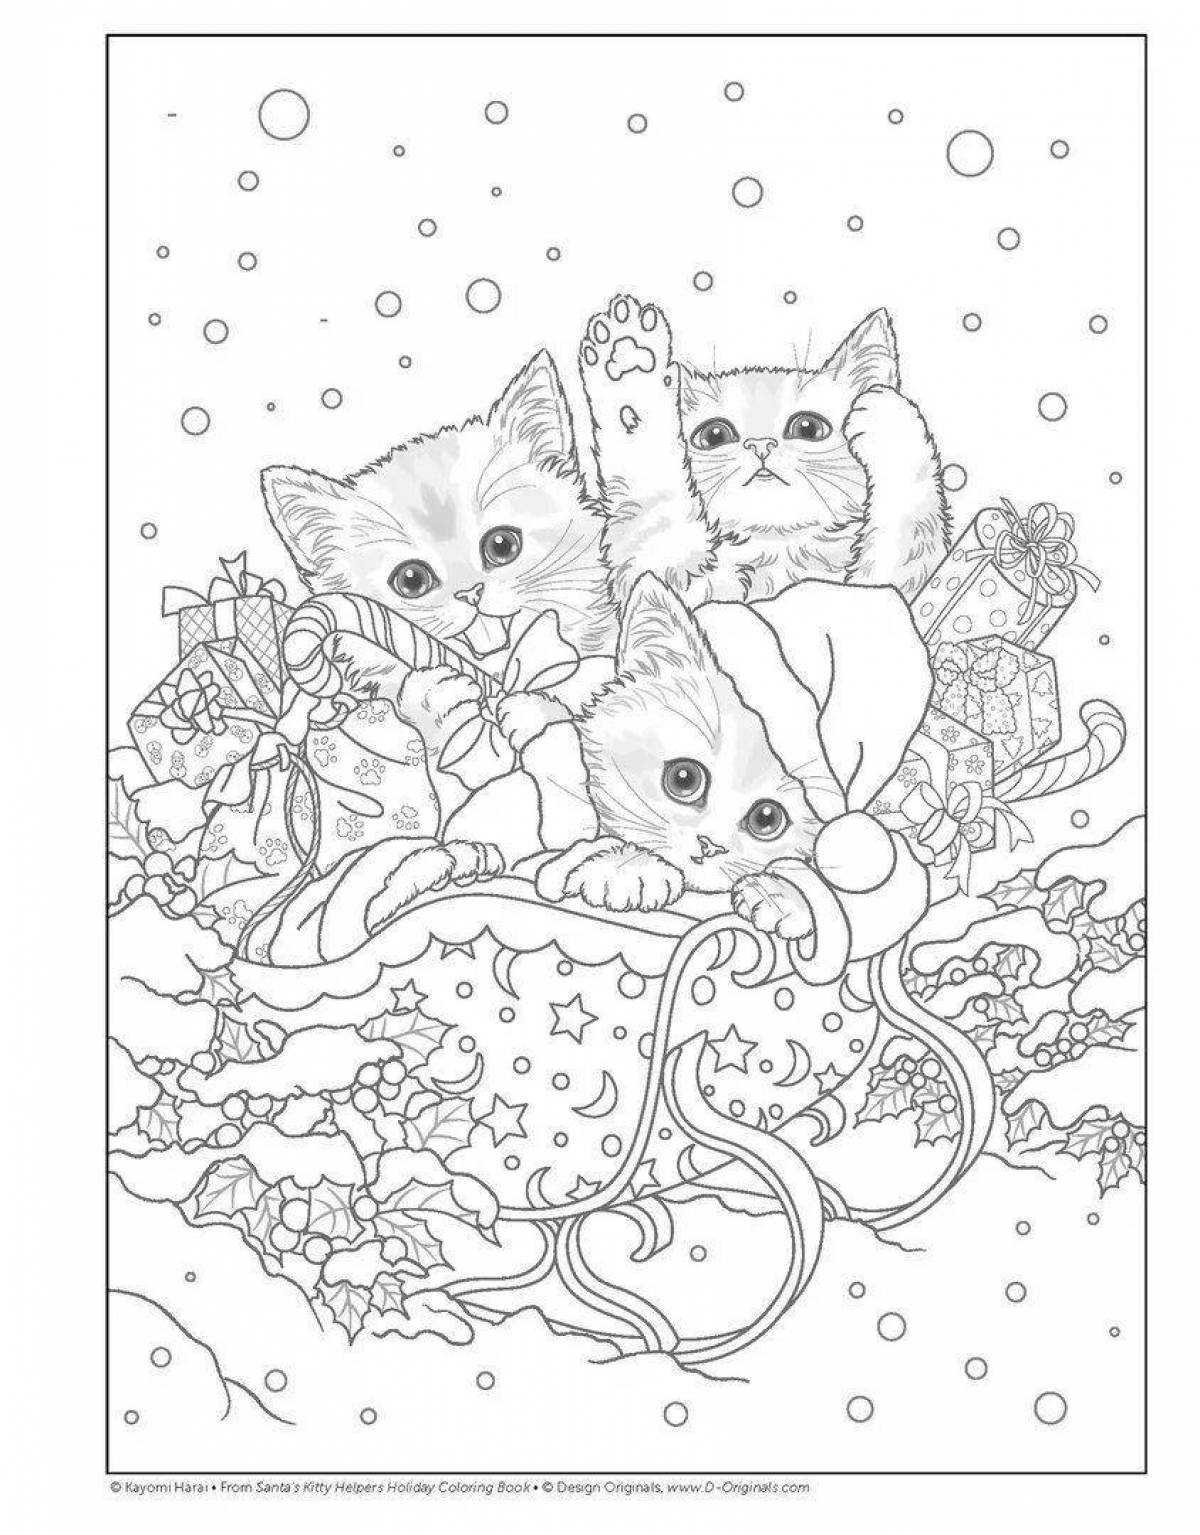 Coloring playful christmas kittens